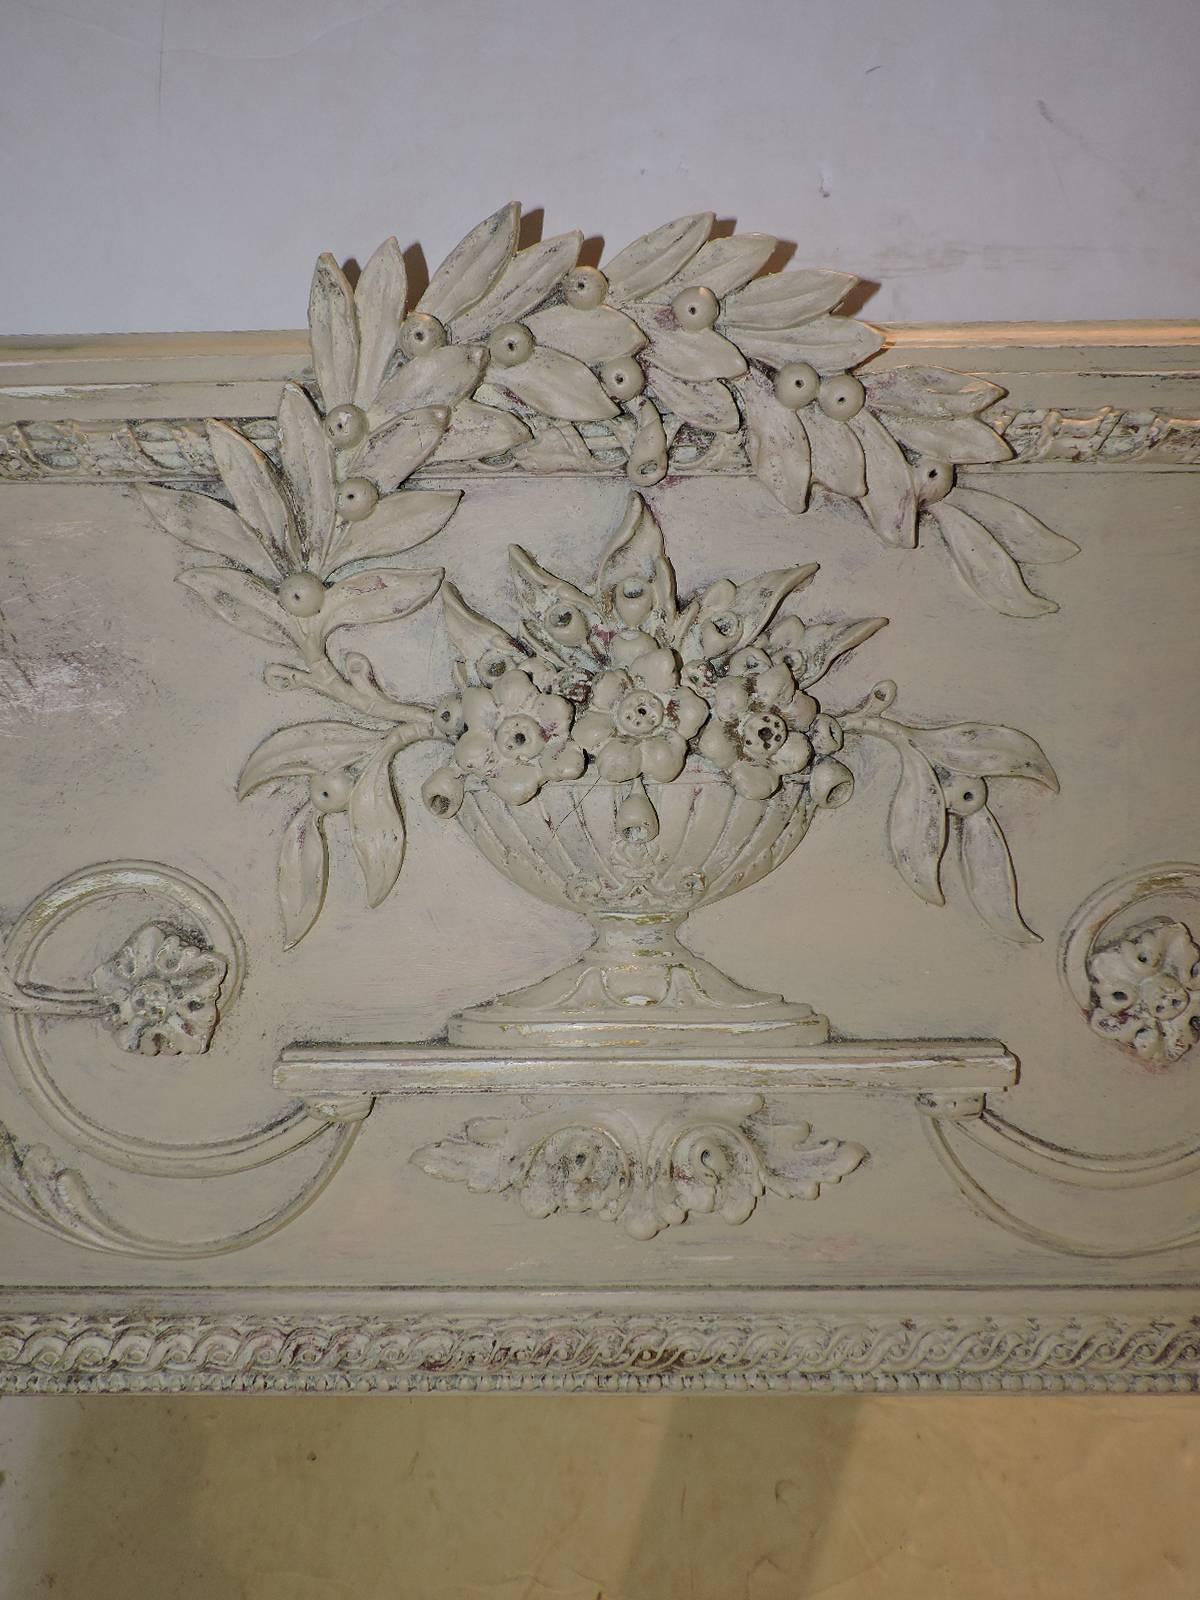 A Louis XV style trumeau mirror by D. Milch & Son with a carved urn & foliate design in relief. The original surface repainted in a lightly aged worn soft cream white finish. See all pictures.